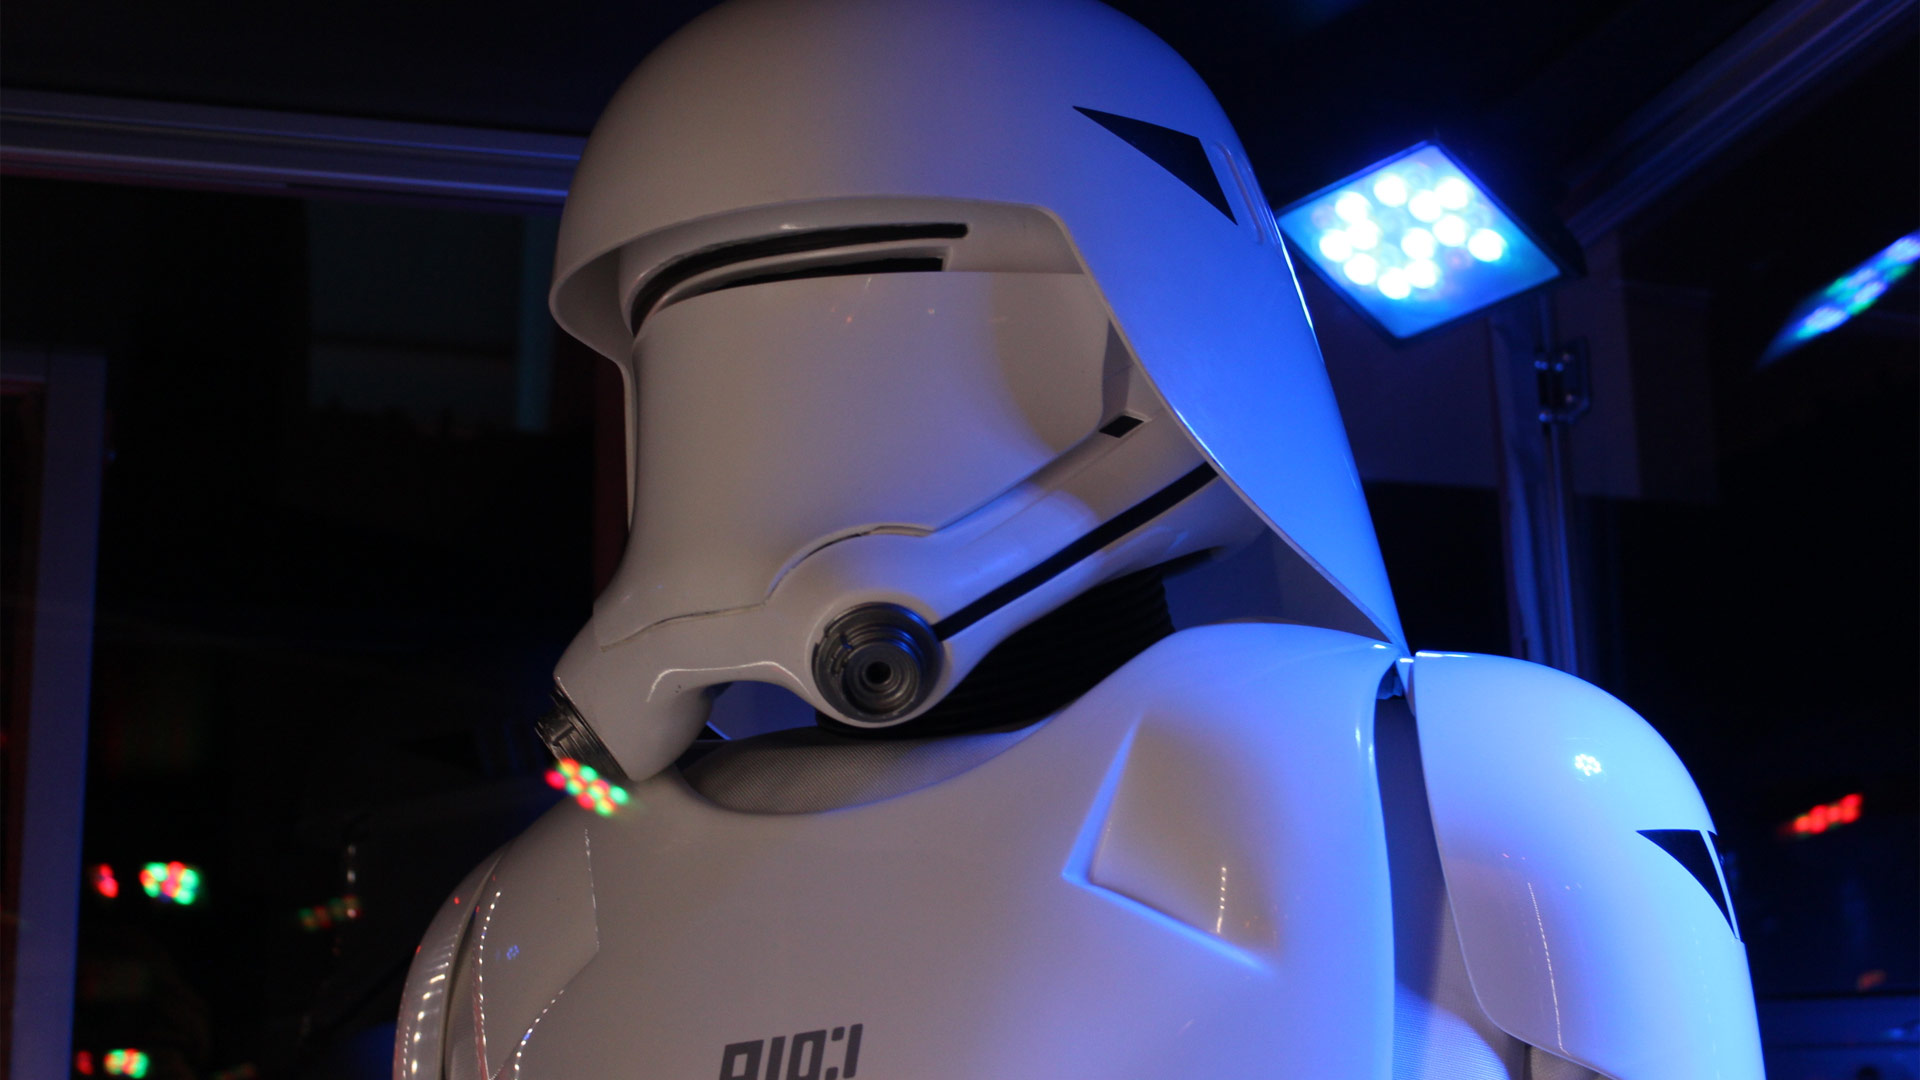 Get A Closer Look At The Lightsaber And Mask Of Star Wars Force